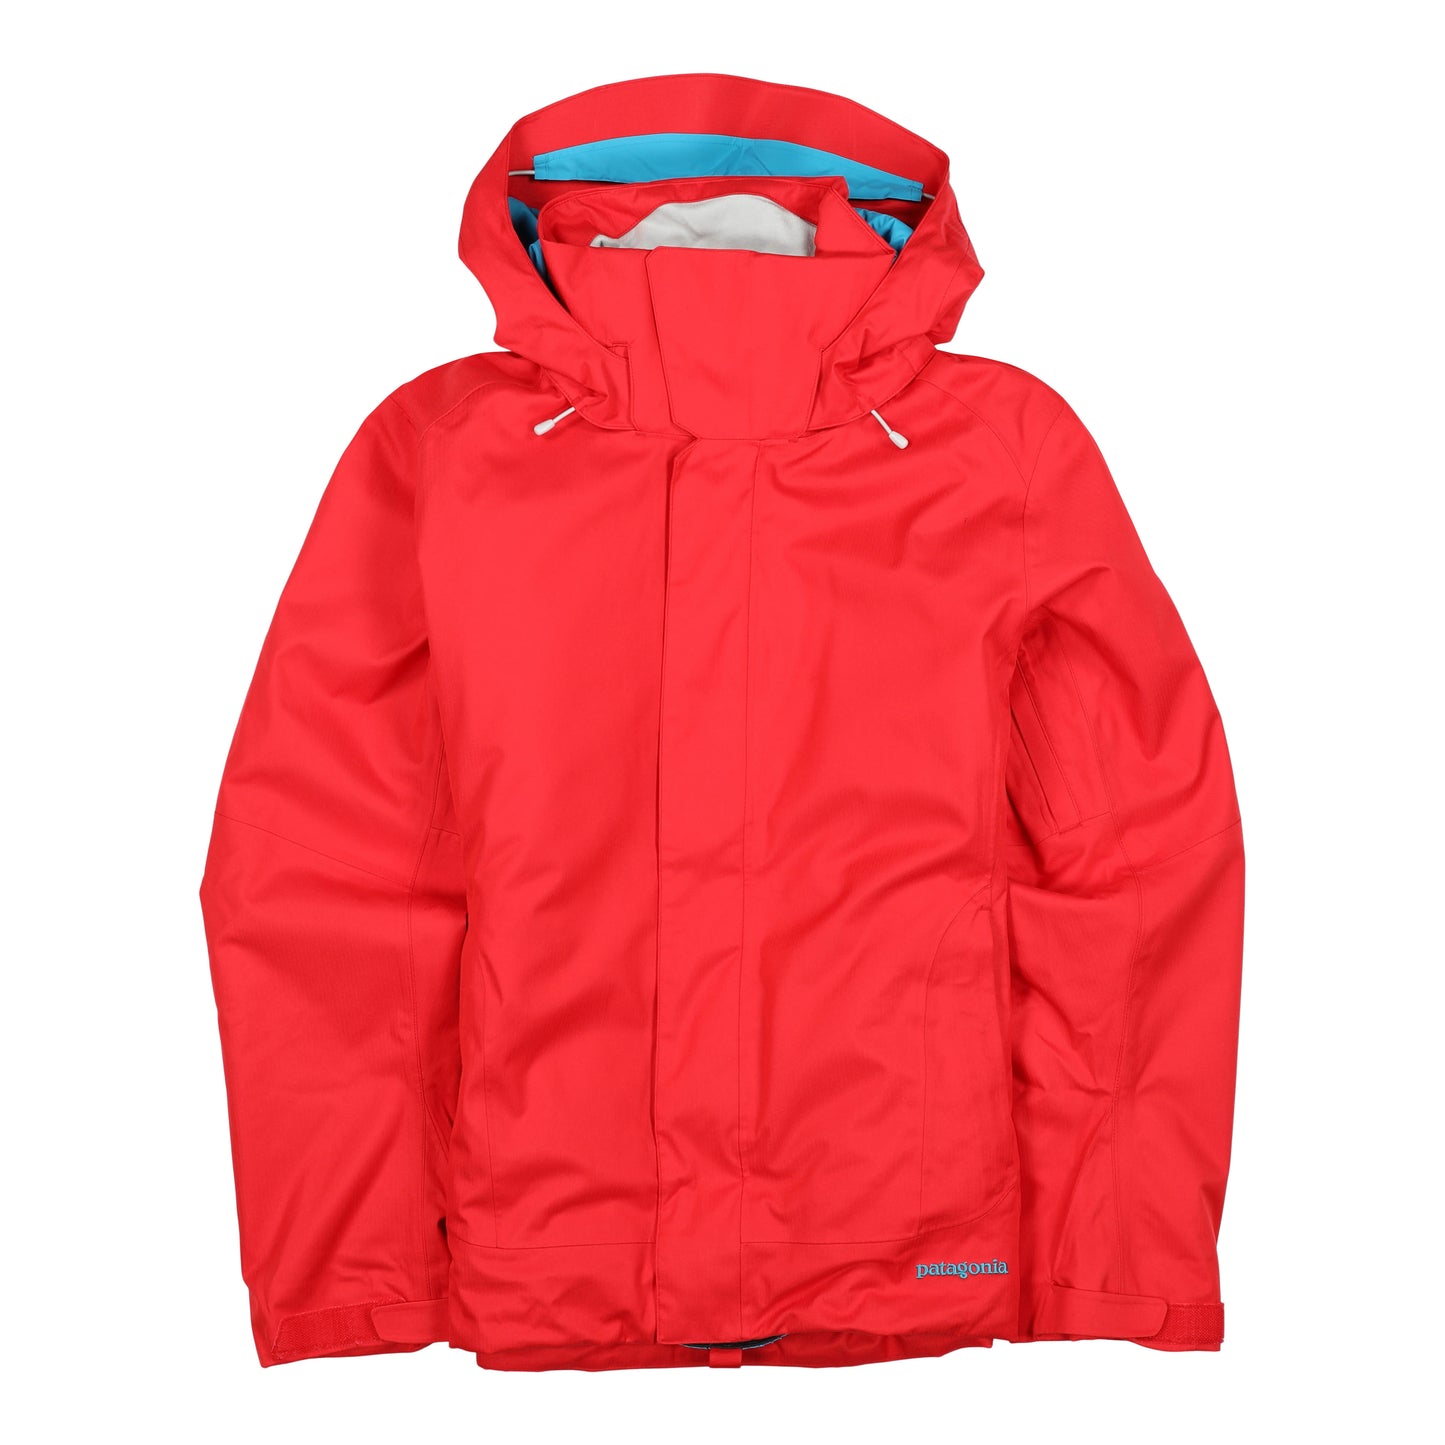 W's Insulated Snowbelle Jacket